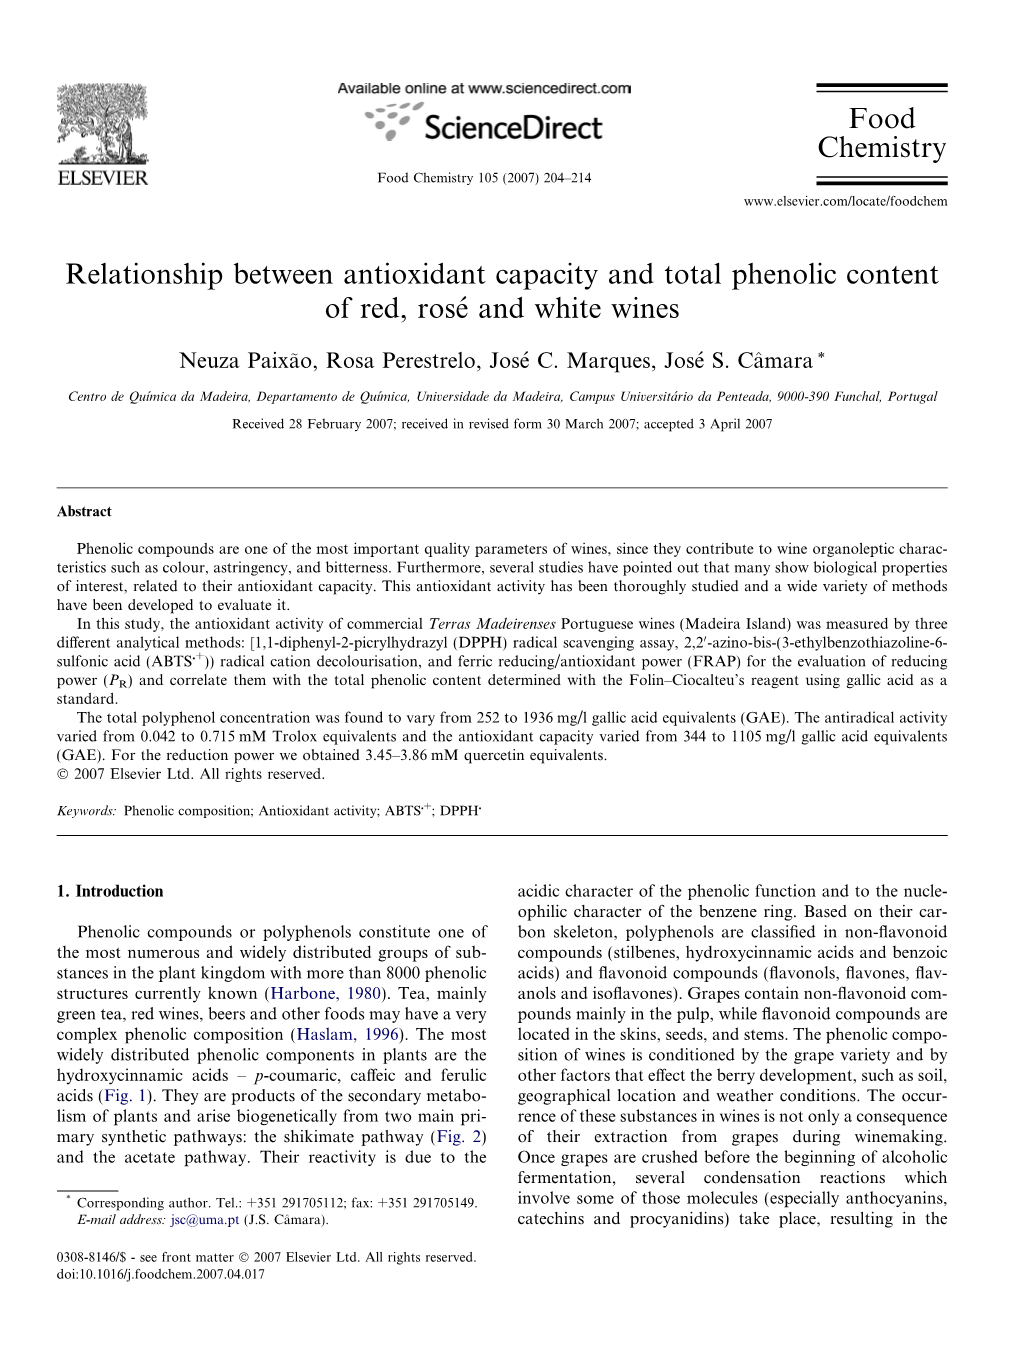 Relationship Between Antioxidant Capacity and Total Phenolic Content of Red, Rose´ and White Wines